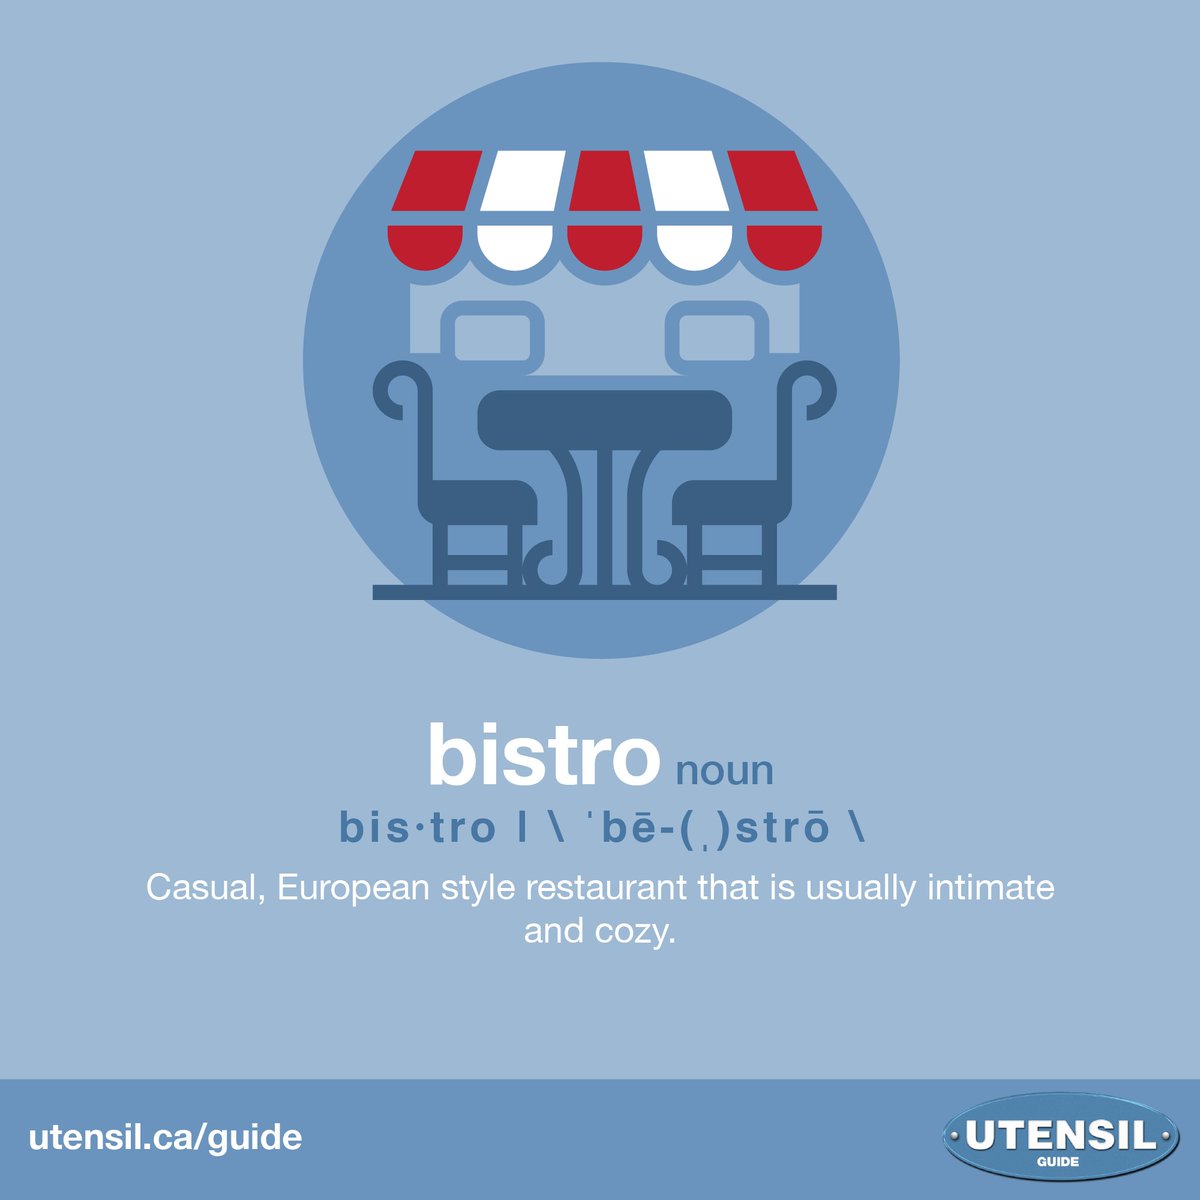 BISTRO (noun) Casual, European-style restaurant that is usually intimate and cozy. #UtensilGuide #CdnAg #CdnFood Learn more food & farming terms at: utensil.ca/guide